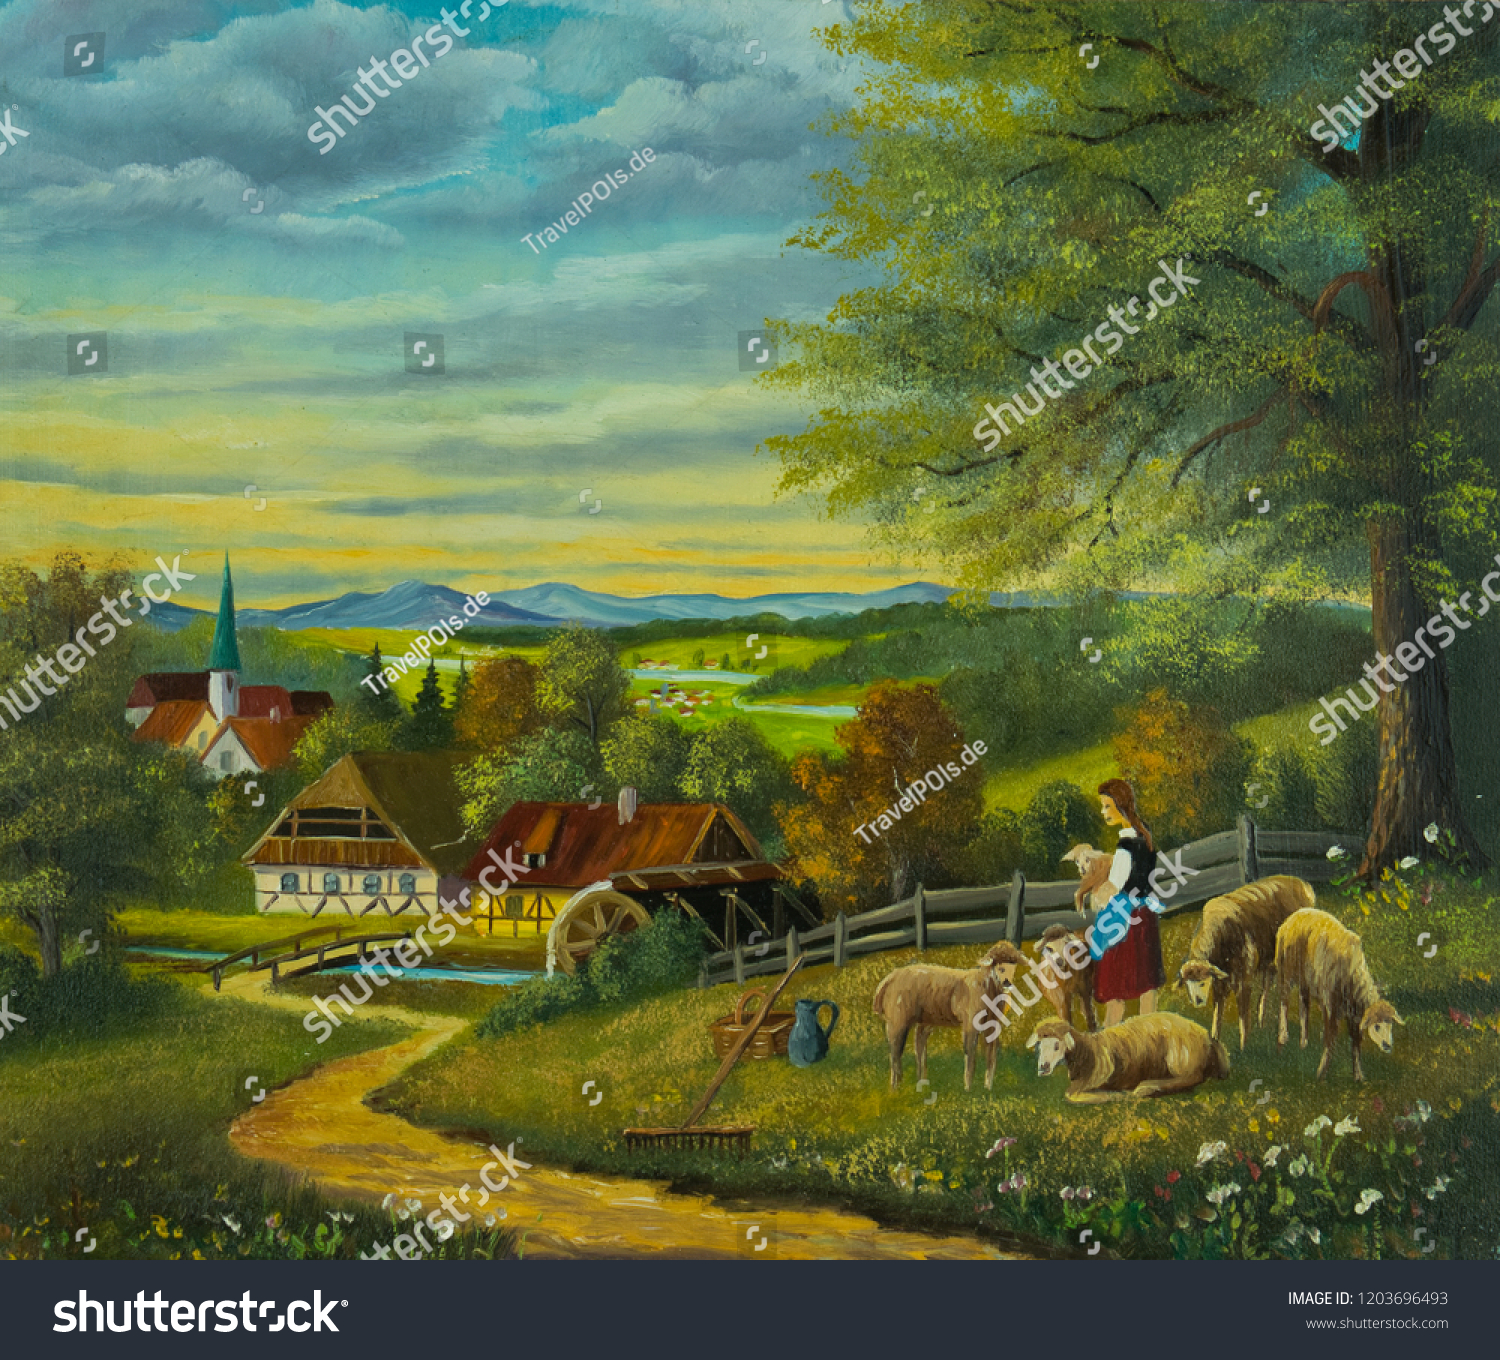 Landscape with sheep in a meadowCountryside With Sheep Acrilyc Art3D Purple Country Landscape PaintingSheep Painting Farmhouse Wall Decor